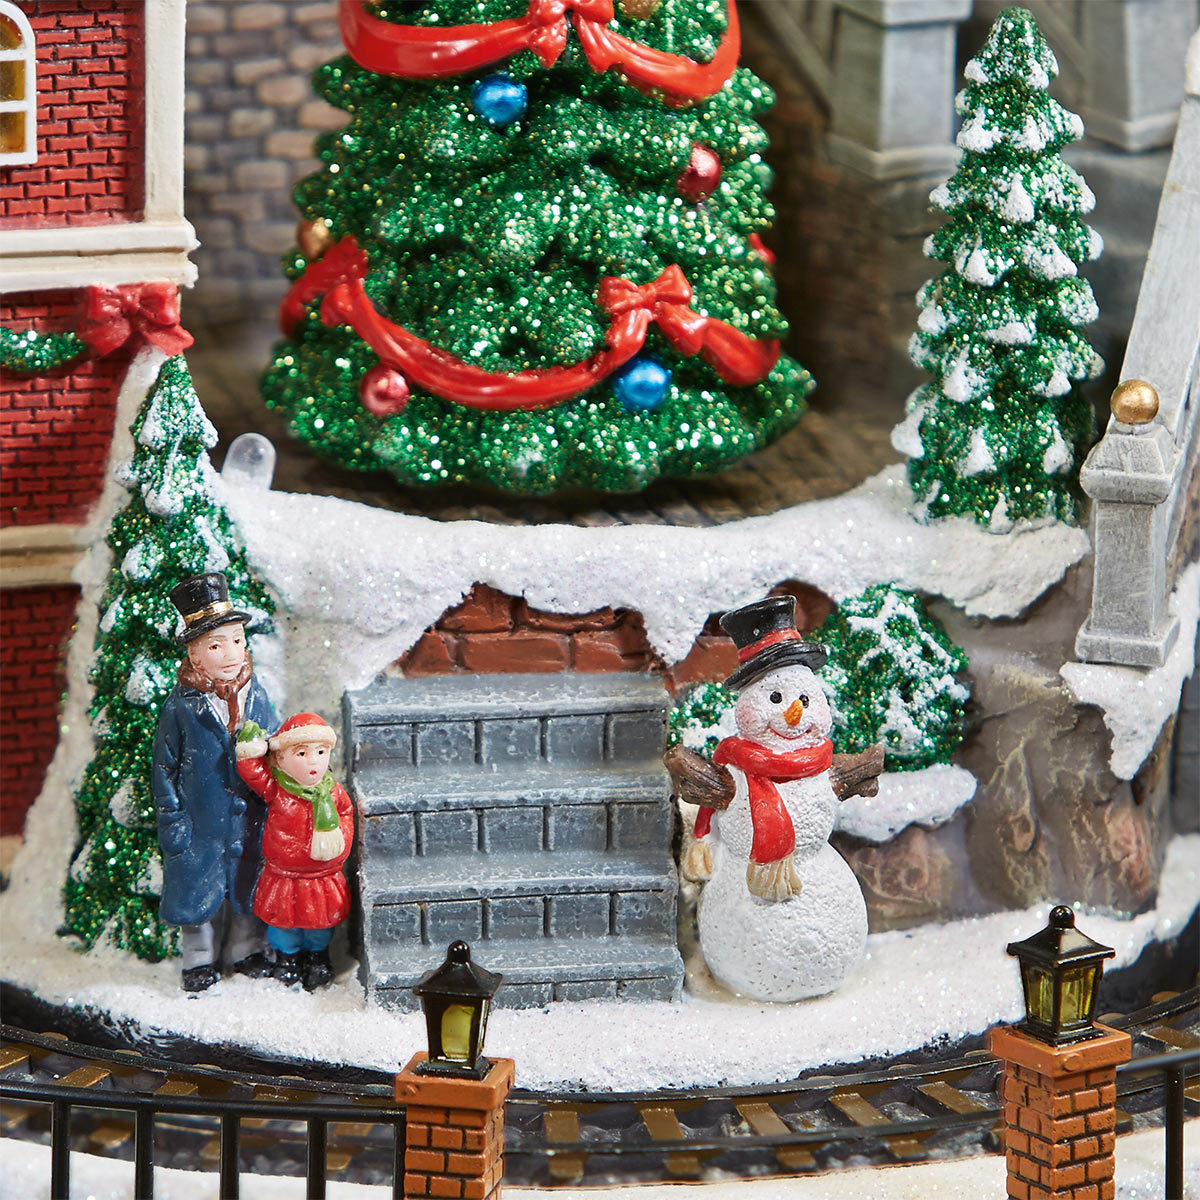  Inch (37 cm) Animated LED Winter Village Scene with ...